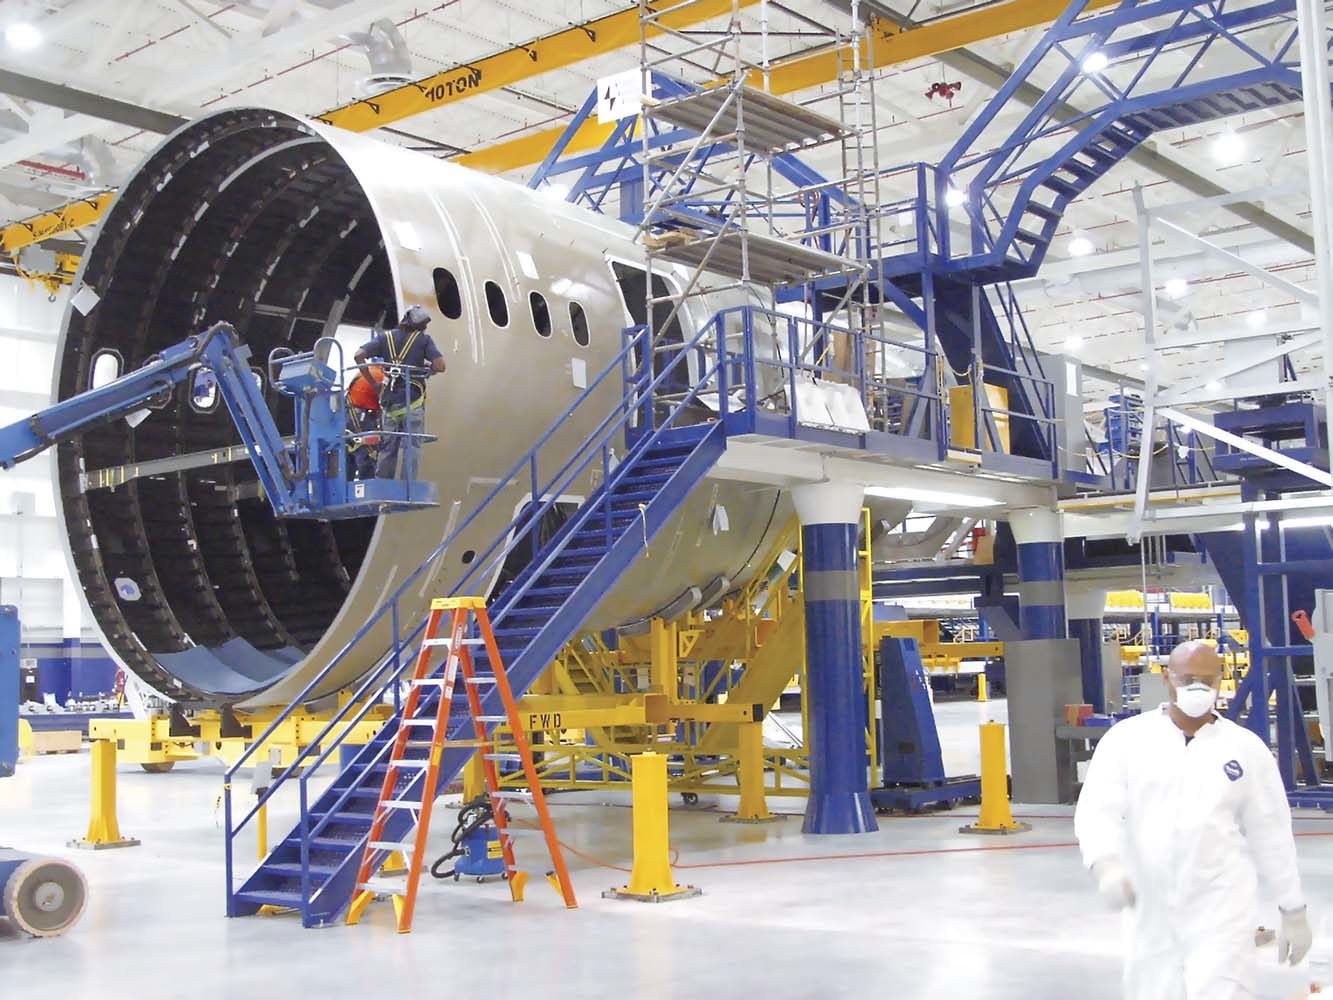 Man & the Machine Gallery - On the Boards and More Page - Vought 787 Composite Fuselage Production Facility5